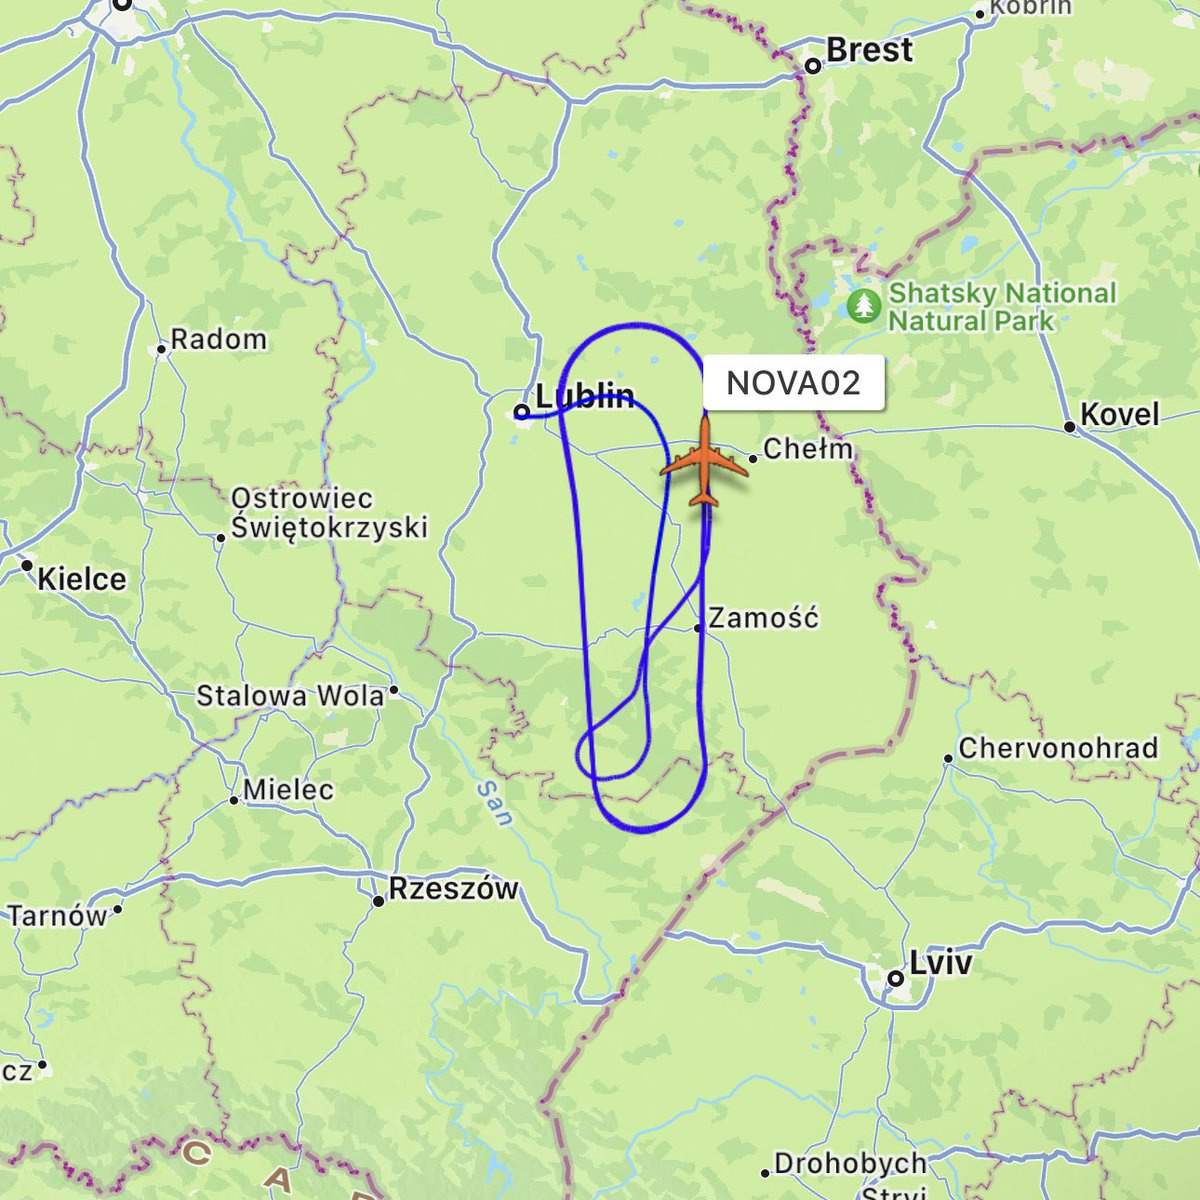 The U.S. Air Force E-3B Sentry and RC-135W seen earlier are still doing laps over Poland near the Ukrainian and Belarusian Border; they have been Airborne for over 7 Hours now and look to currently be getting refueled in order to keep an eye out for a bit longer